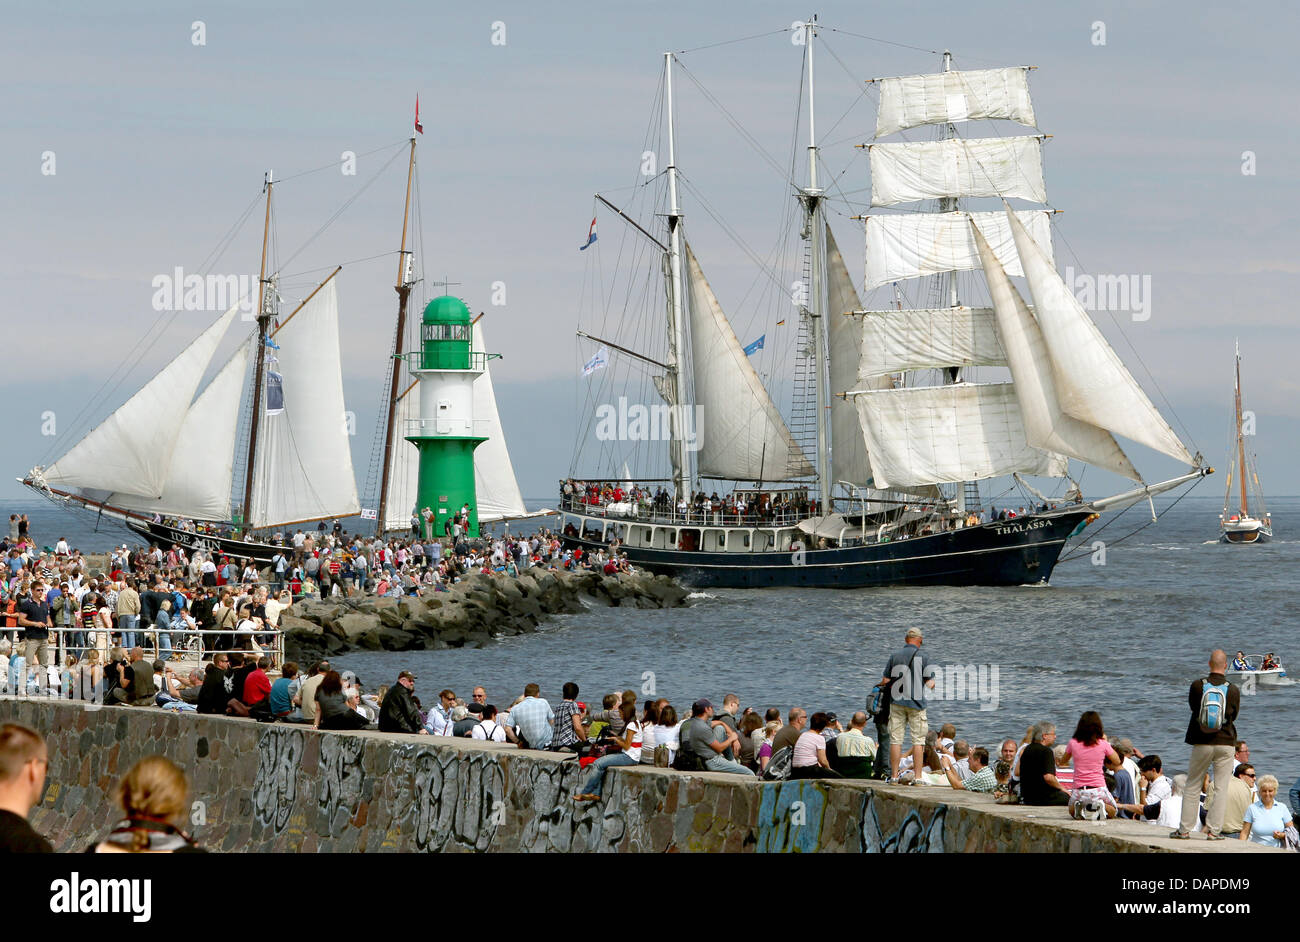 Onlookers watch the fleet sail on the Baltic Sea at the 21st Hanse Sail from the Warnemuend Mole in Rockstock, Germany, 13 August 2011. Around 25 traditional and museum ships from the entire world have come together for the maritime spectacle. Photo: BERND WUESTNECK Stock Photo